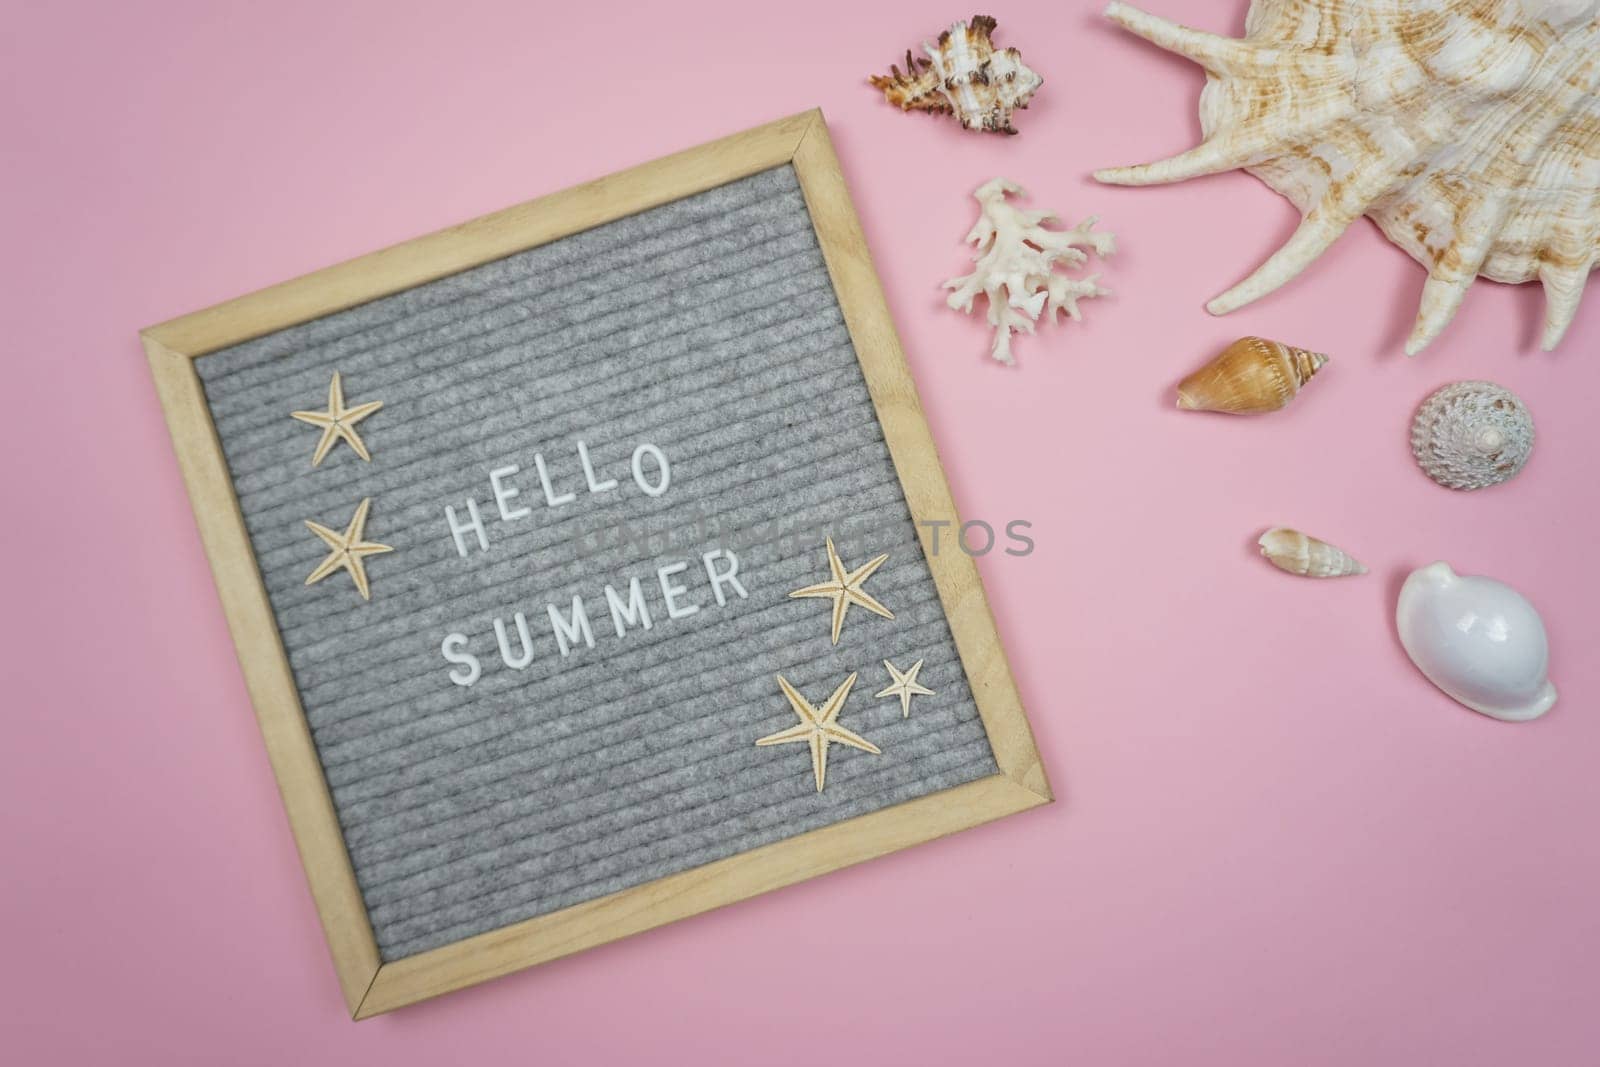 A board with the word Hello, summer written on it. On a pink background are a variety of shells.